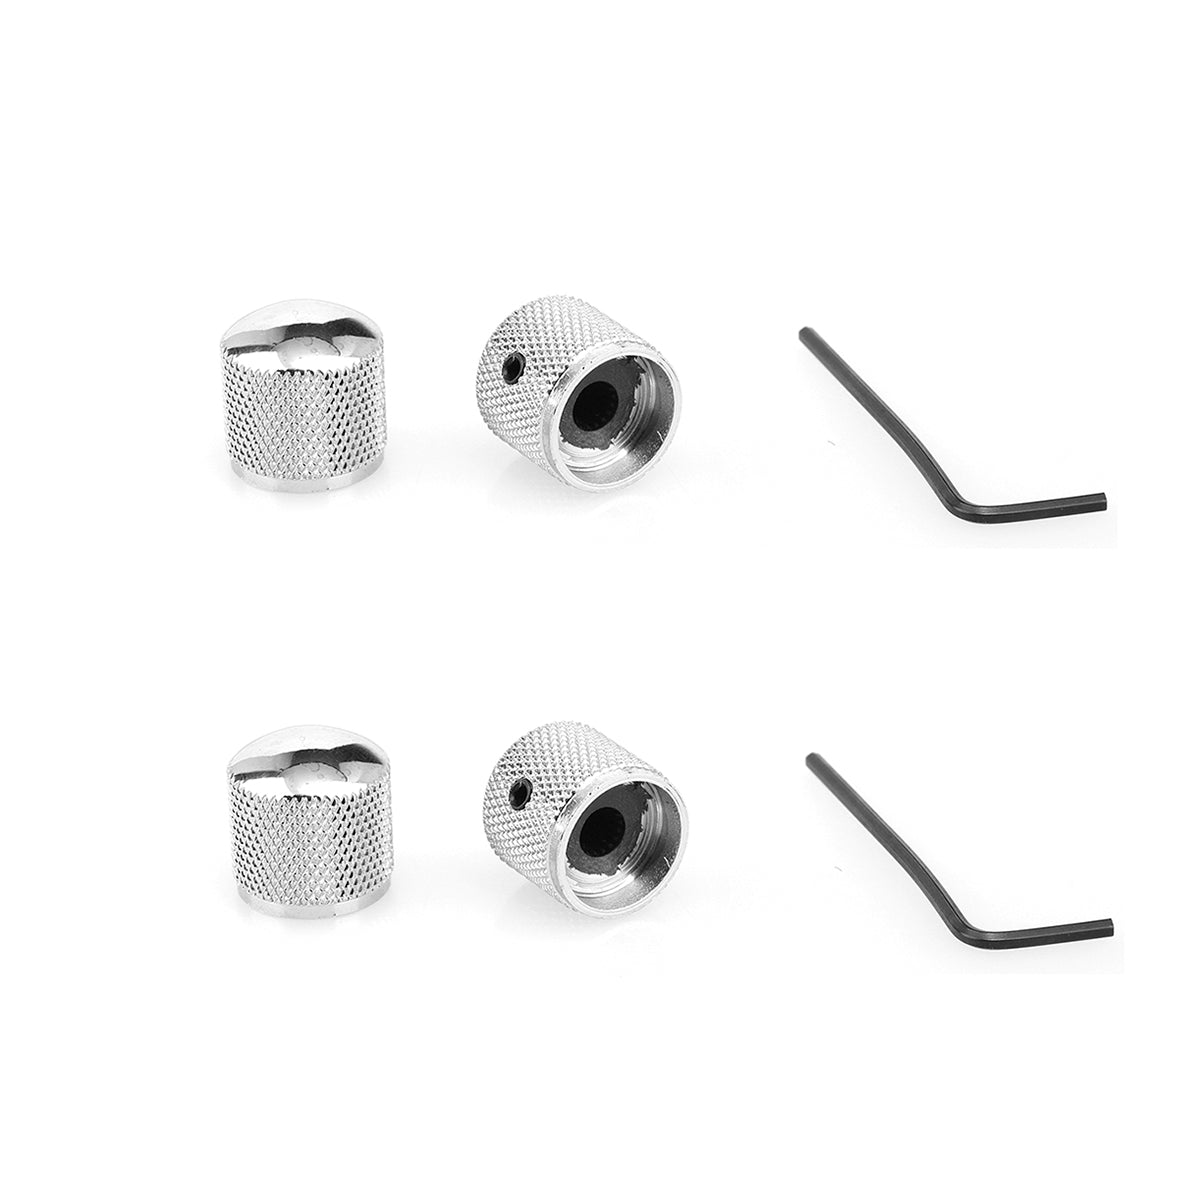 Musiclily Metric Heavy Metal Knurled Dome Control Knobs for Electric Guitar or Bass, Chrome(4 Pieces)